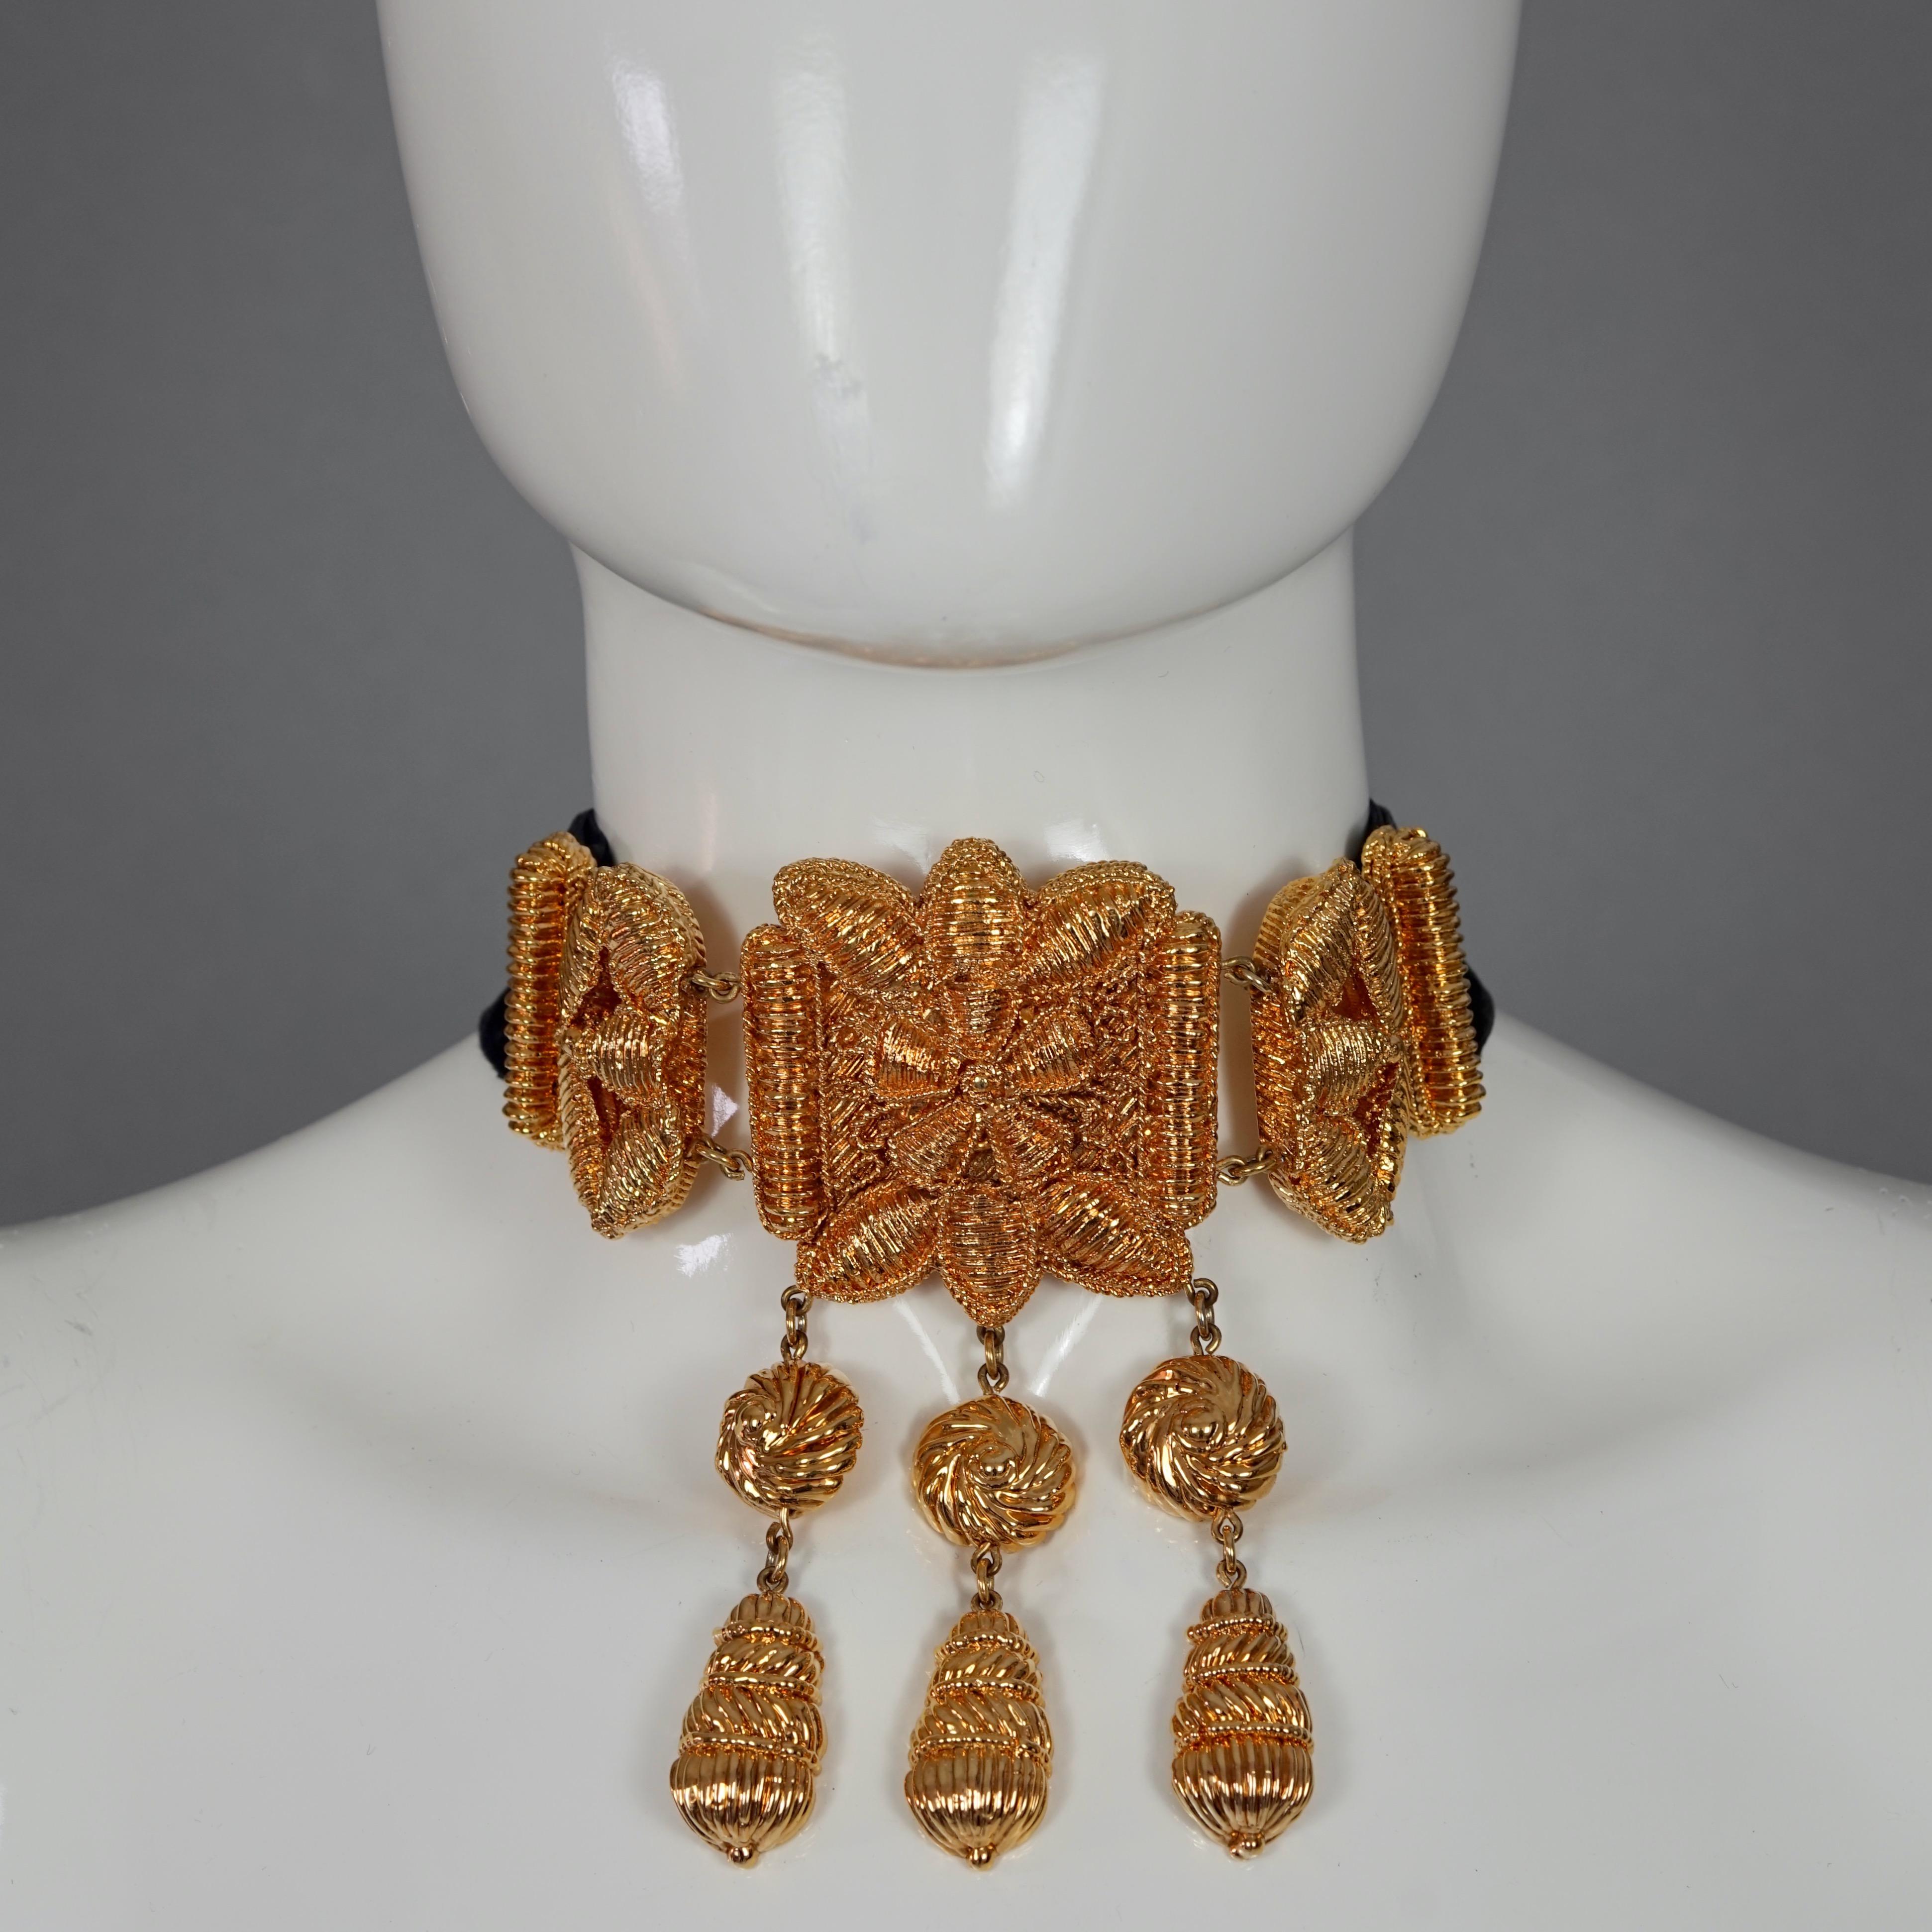 Vintage CHRISTIAN LACROIX Byzantine Opulent Choker Necklace

Measurements:
Buckle Height:  4.92 inches (12.5 cm)
Buckle Width: 5.51 inches (14 cm)
Strap Height: 1.45 inches (3.7 cm)
Wearable Length: 33.85 inches (86 cm) 

Features:
- 100% Authentic